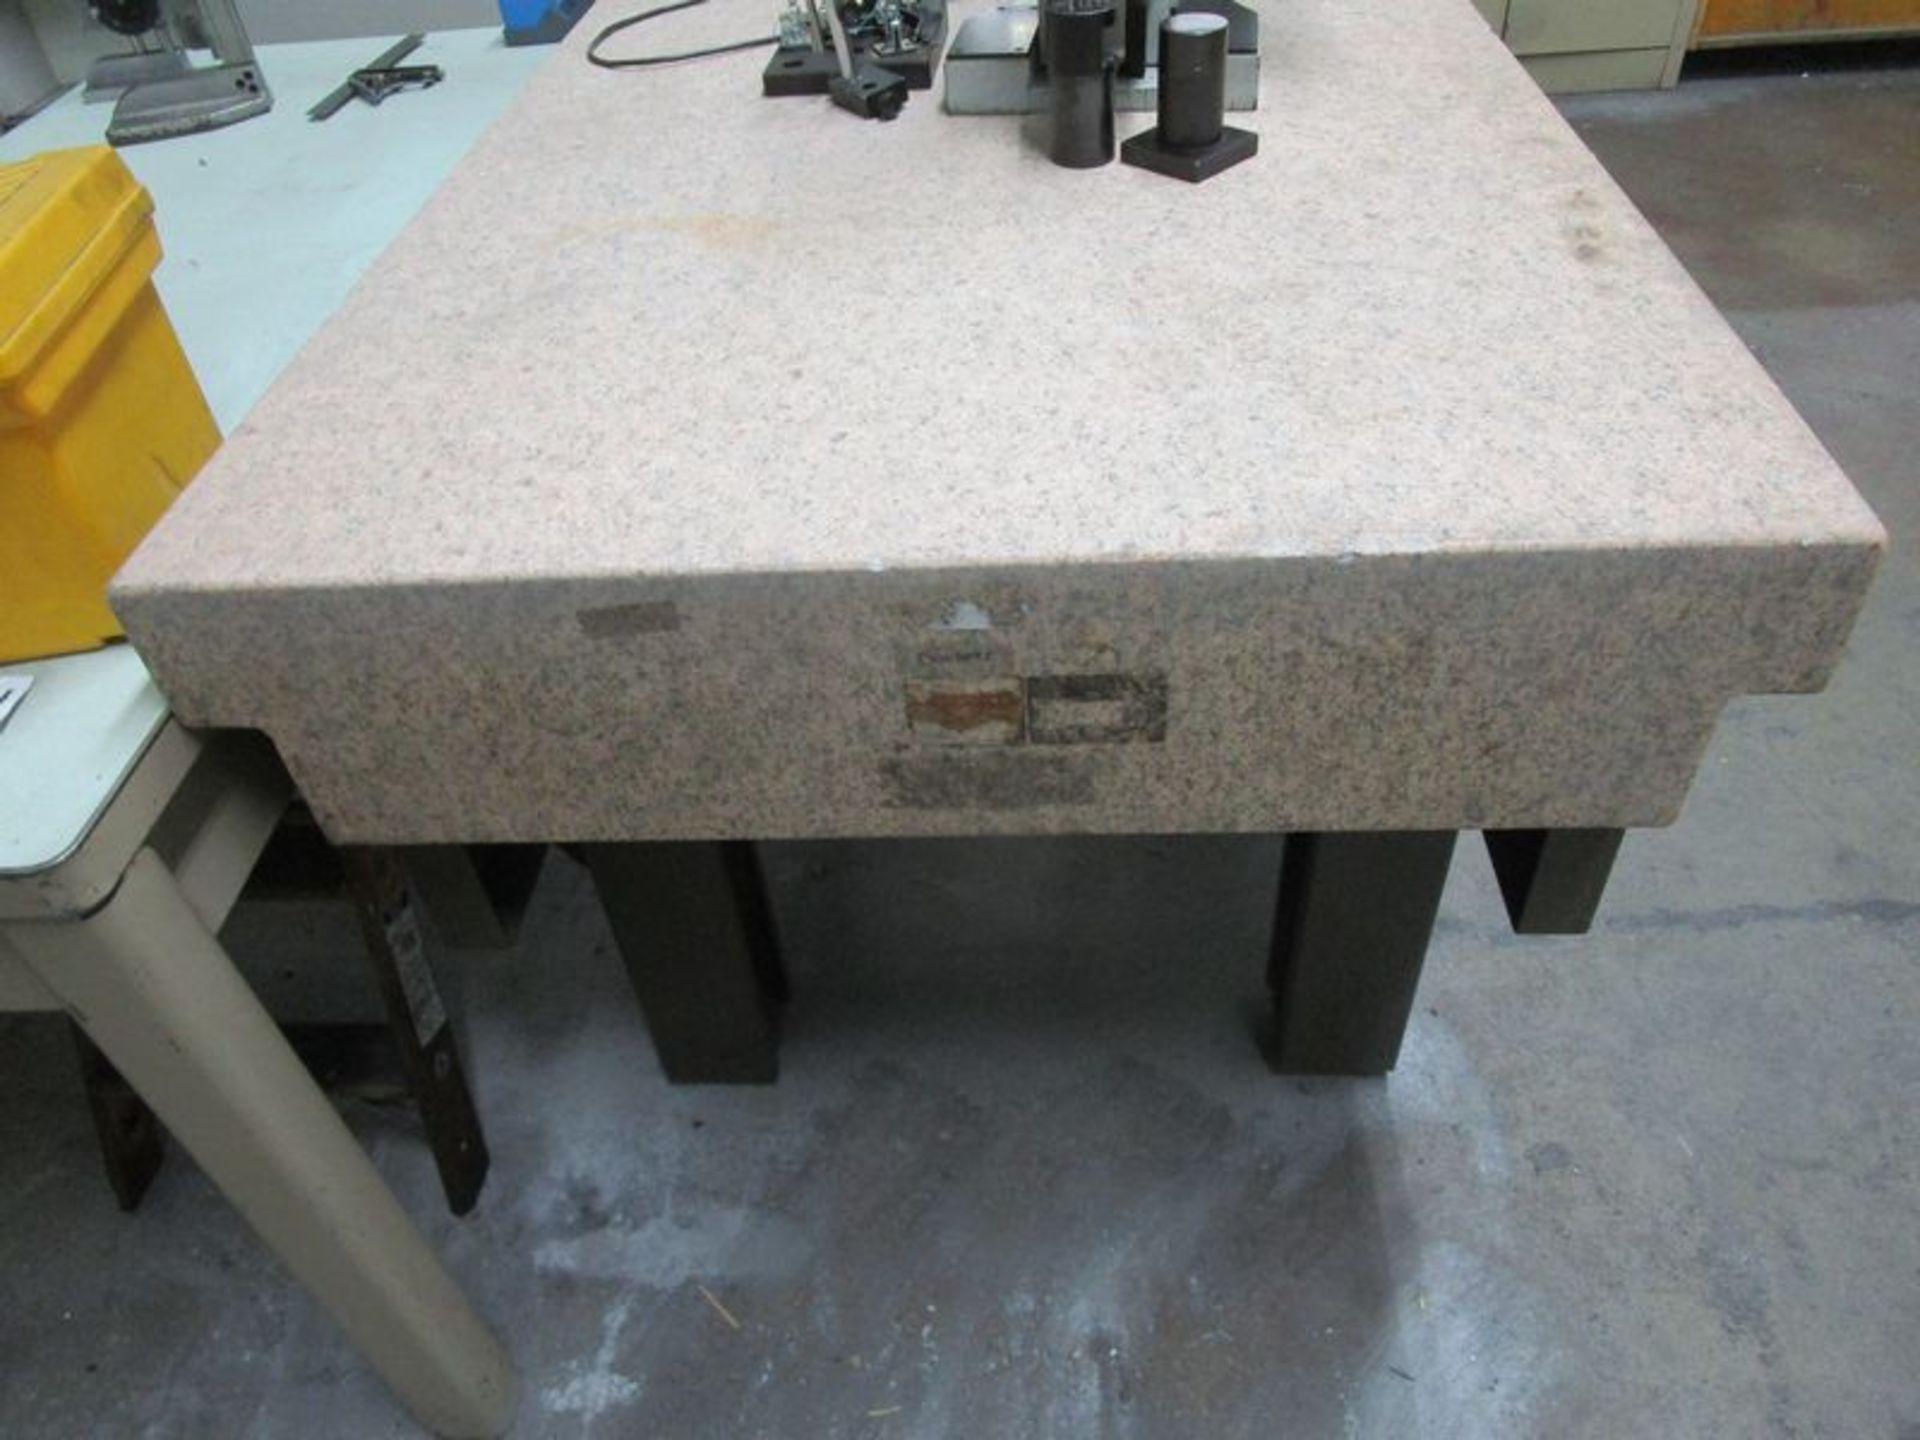 Starrett Granite Surface Plate with Stand - Image 2 of 2